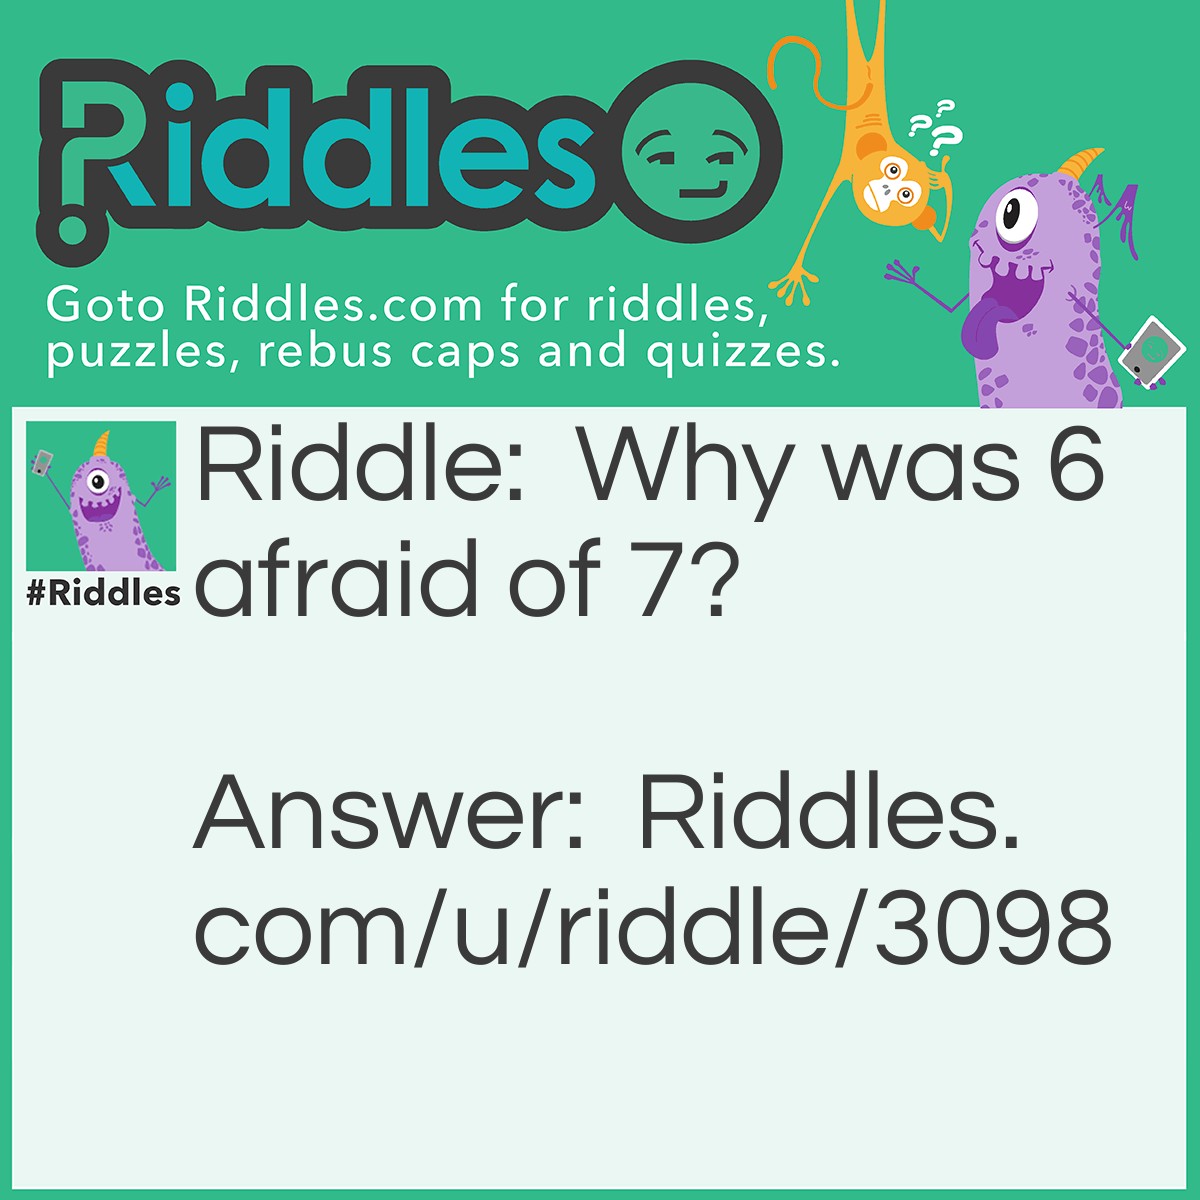 Riddle: Why was 6 afraid of 7? Answer: Because 7,8,9. (Because seven ate nine.)